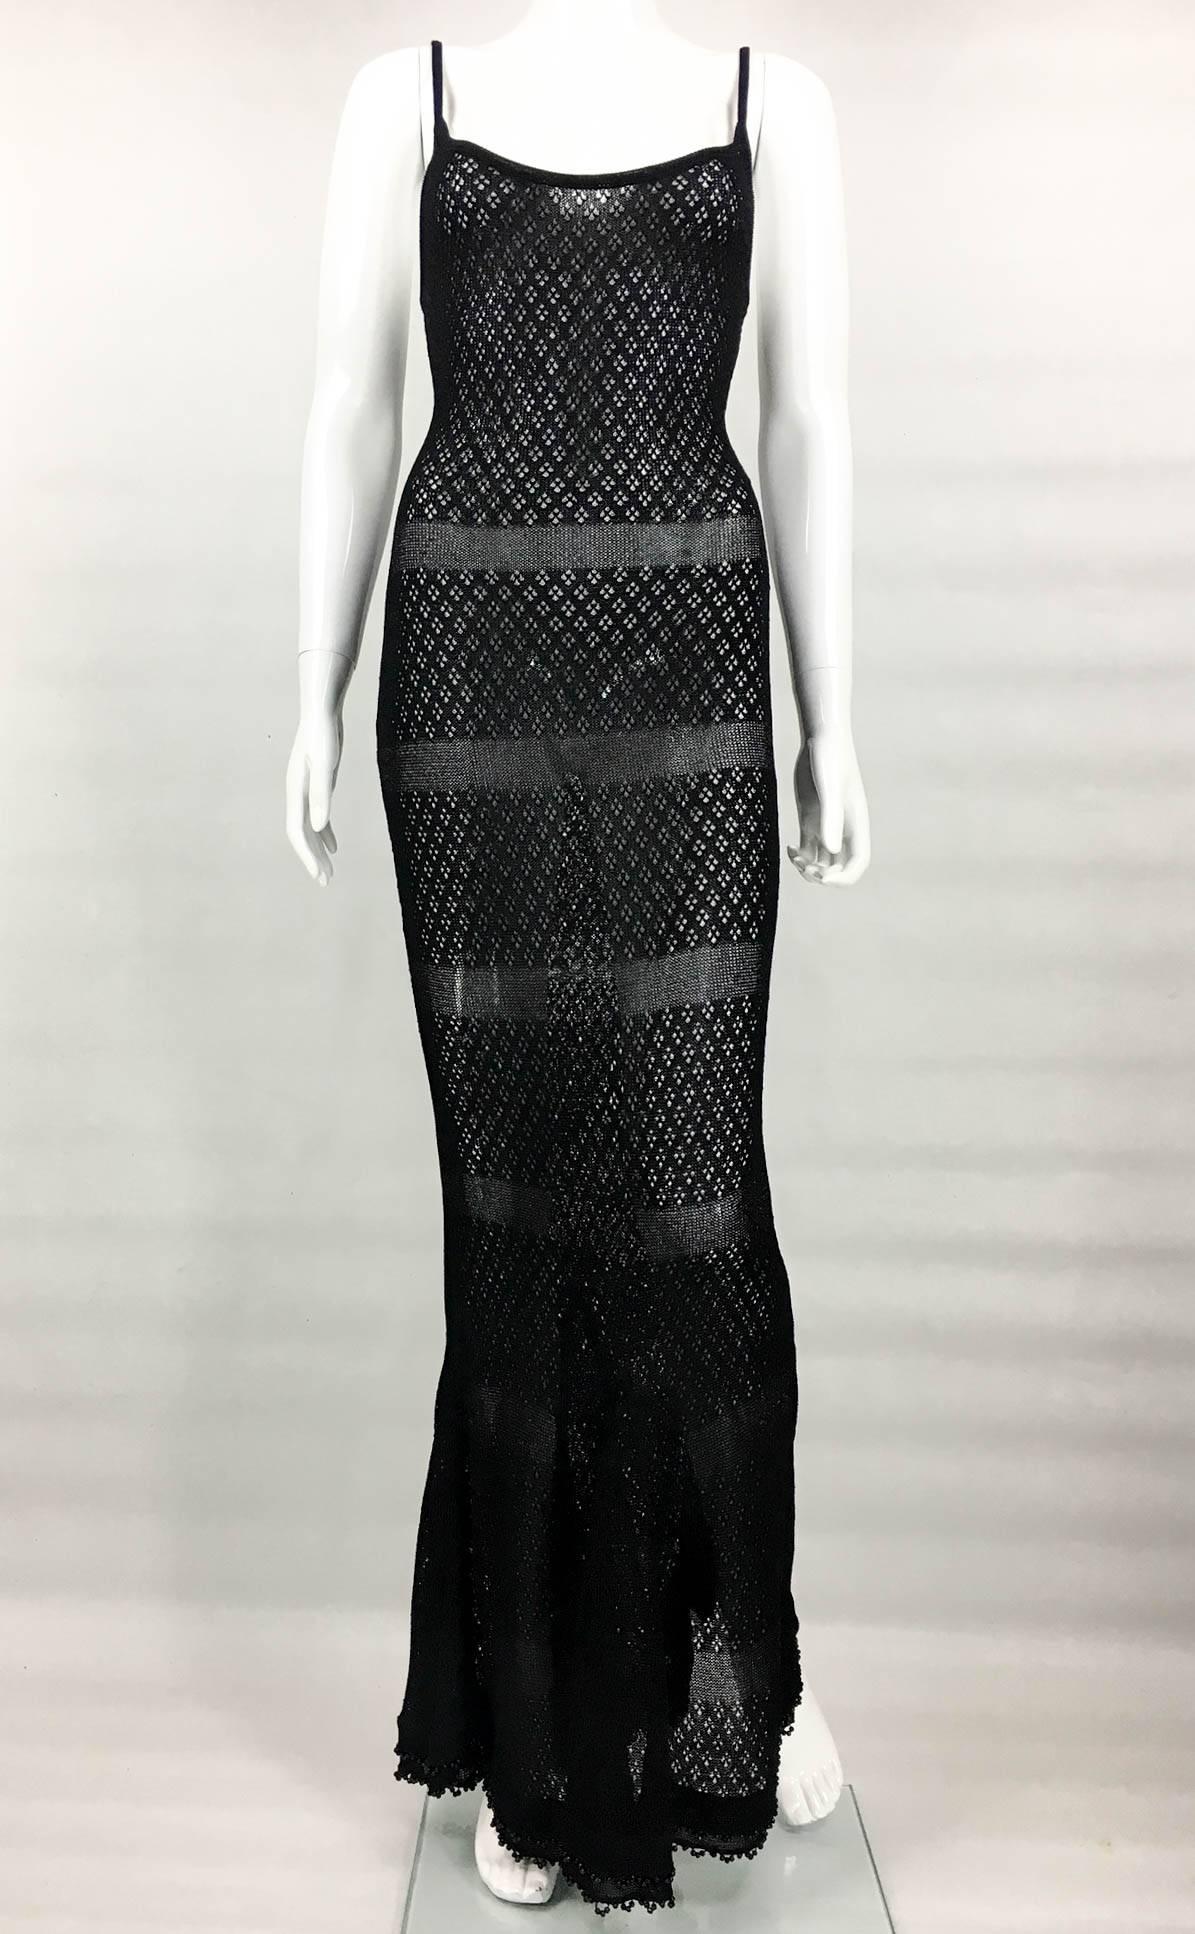 Black Chanel Runway and Campaign Sheer Knitted Dress With Pearl Embellishment - 1995